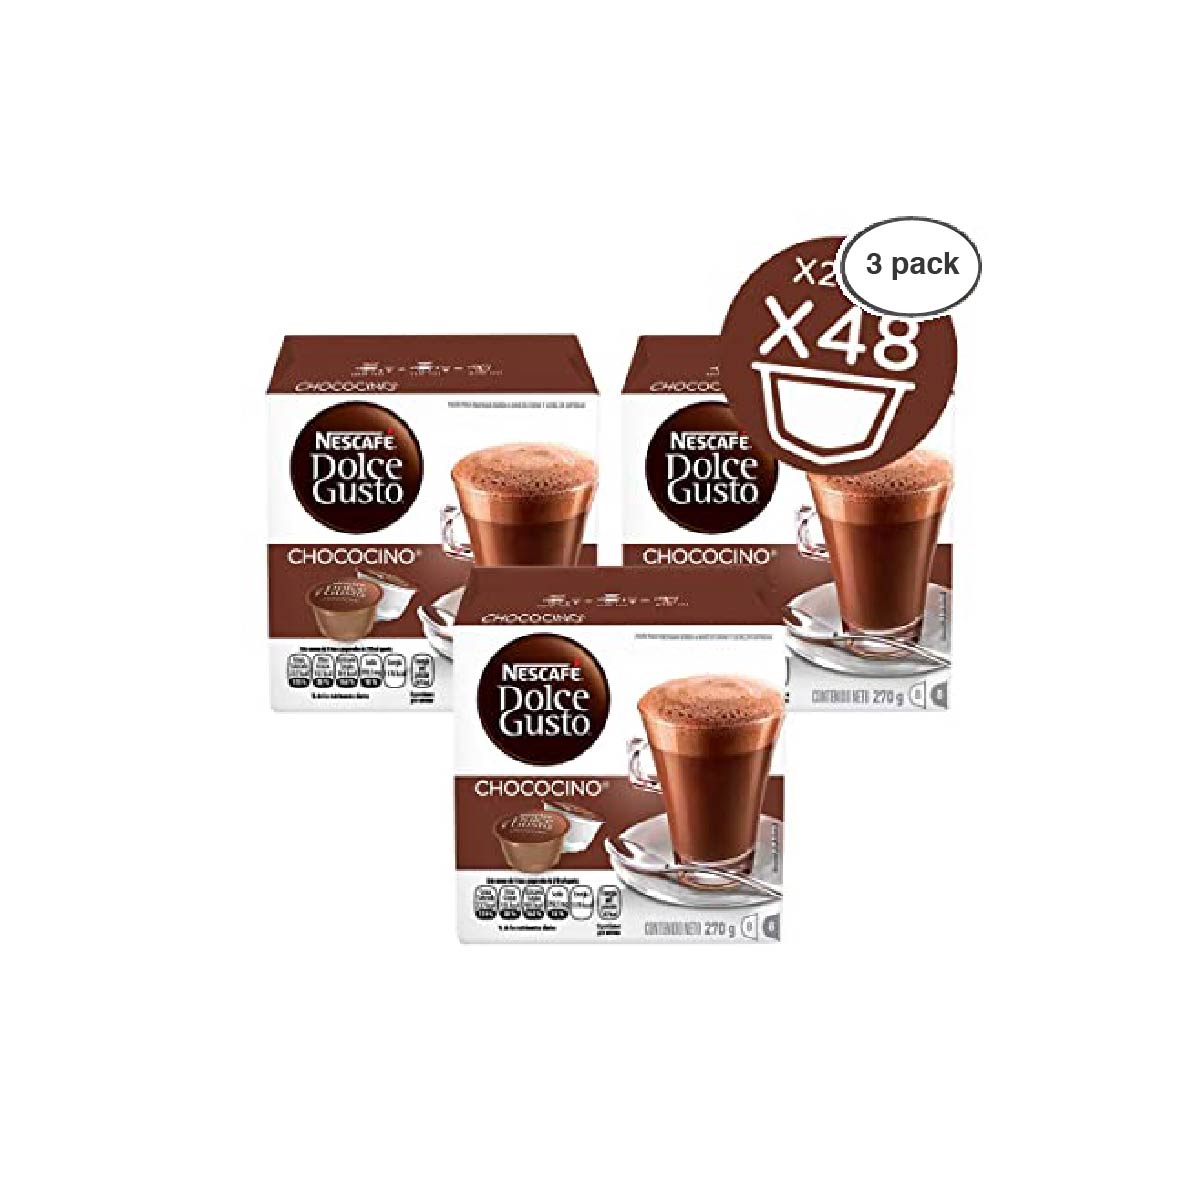 Nescafe Dolce Gusto Chococino pack of 3